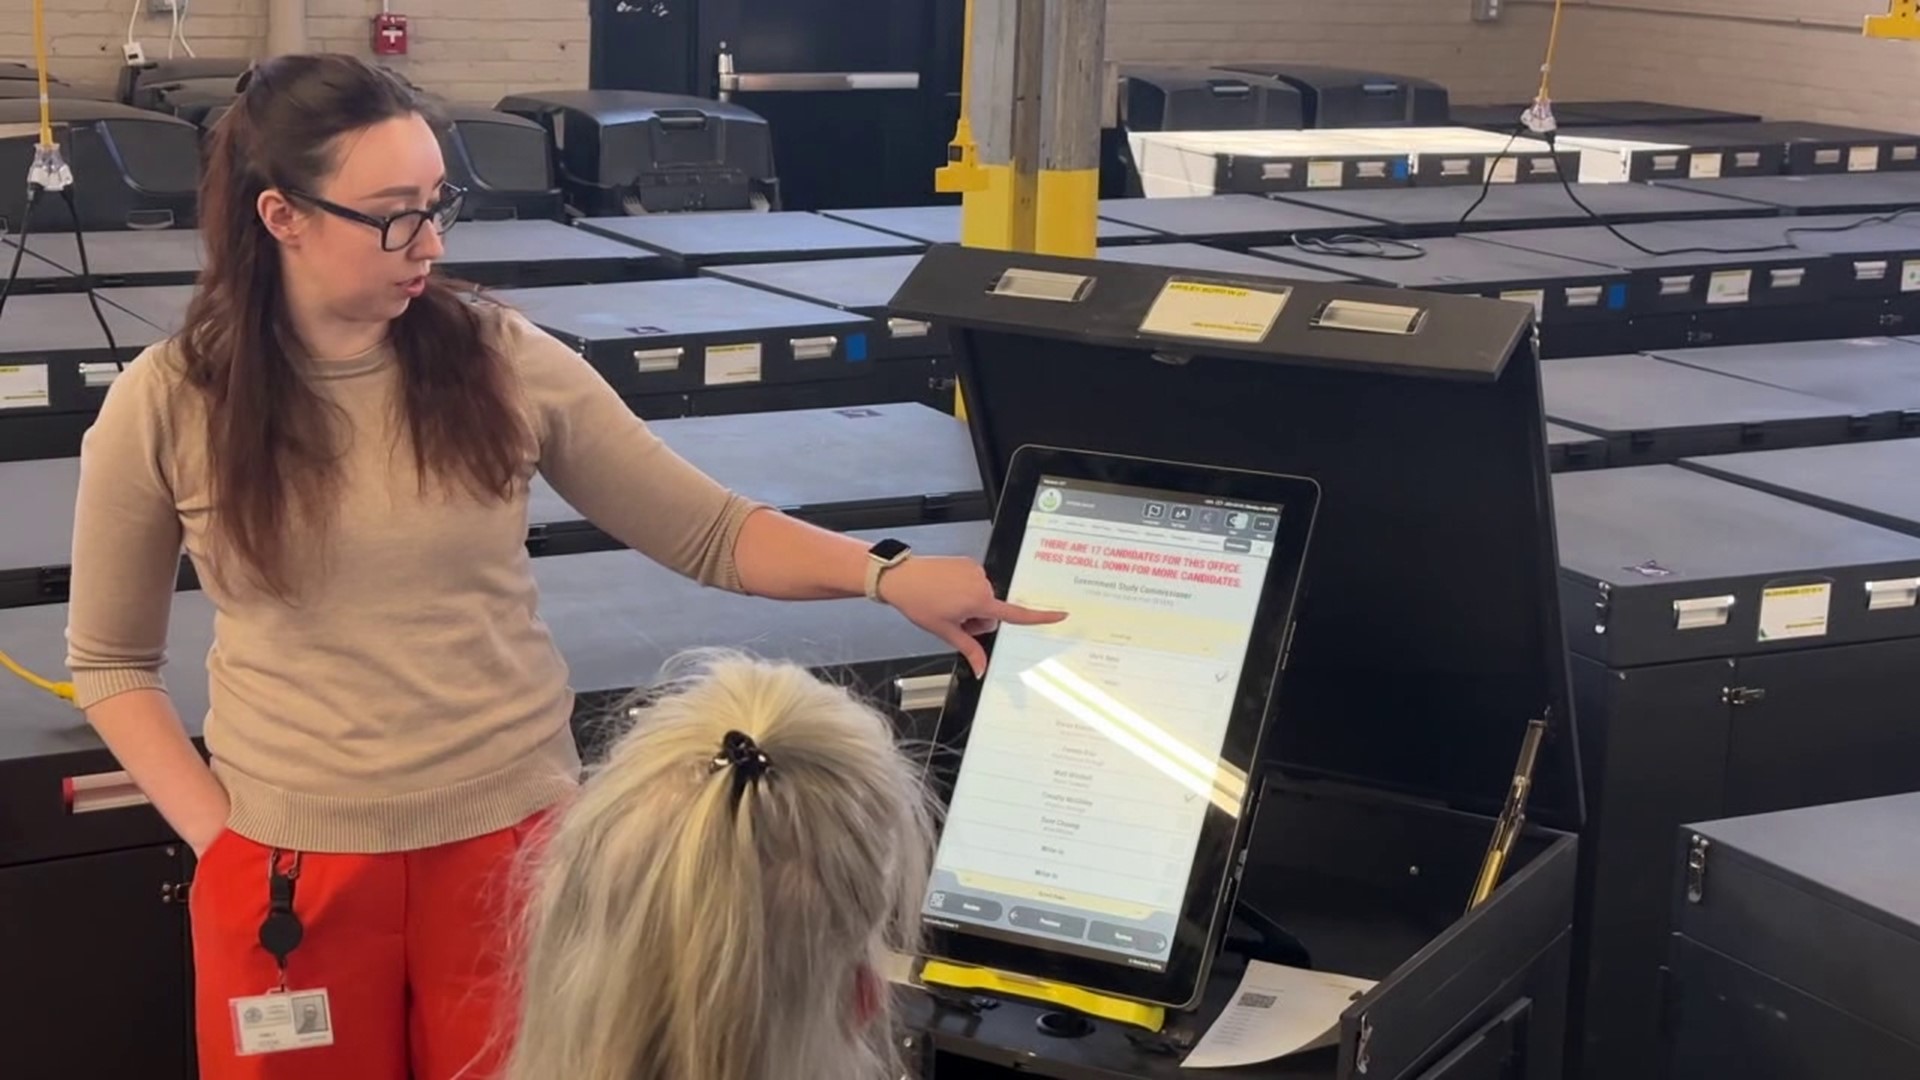 Newswatch 16's Chelsea Strub stopped by the elections warehouse in Wilkes-Barre, where the county is testing voting machines ahead of Primary Election Day.